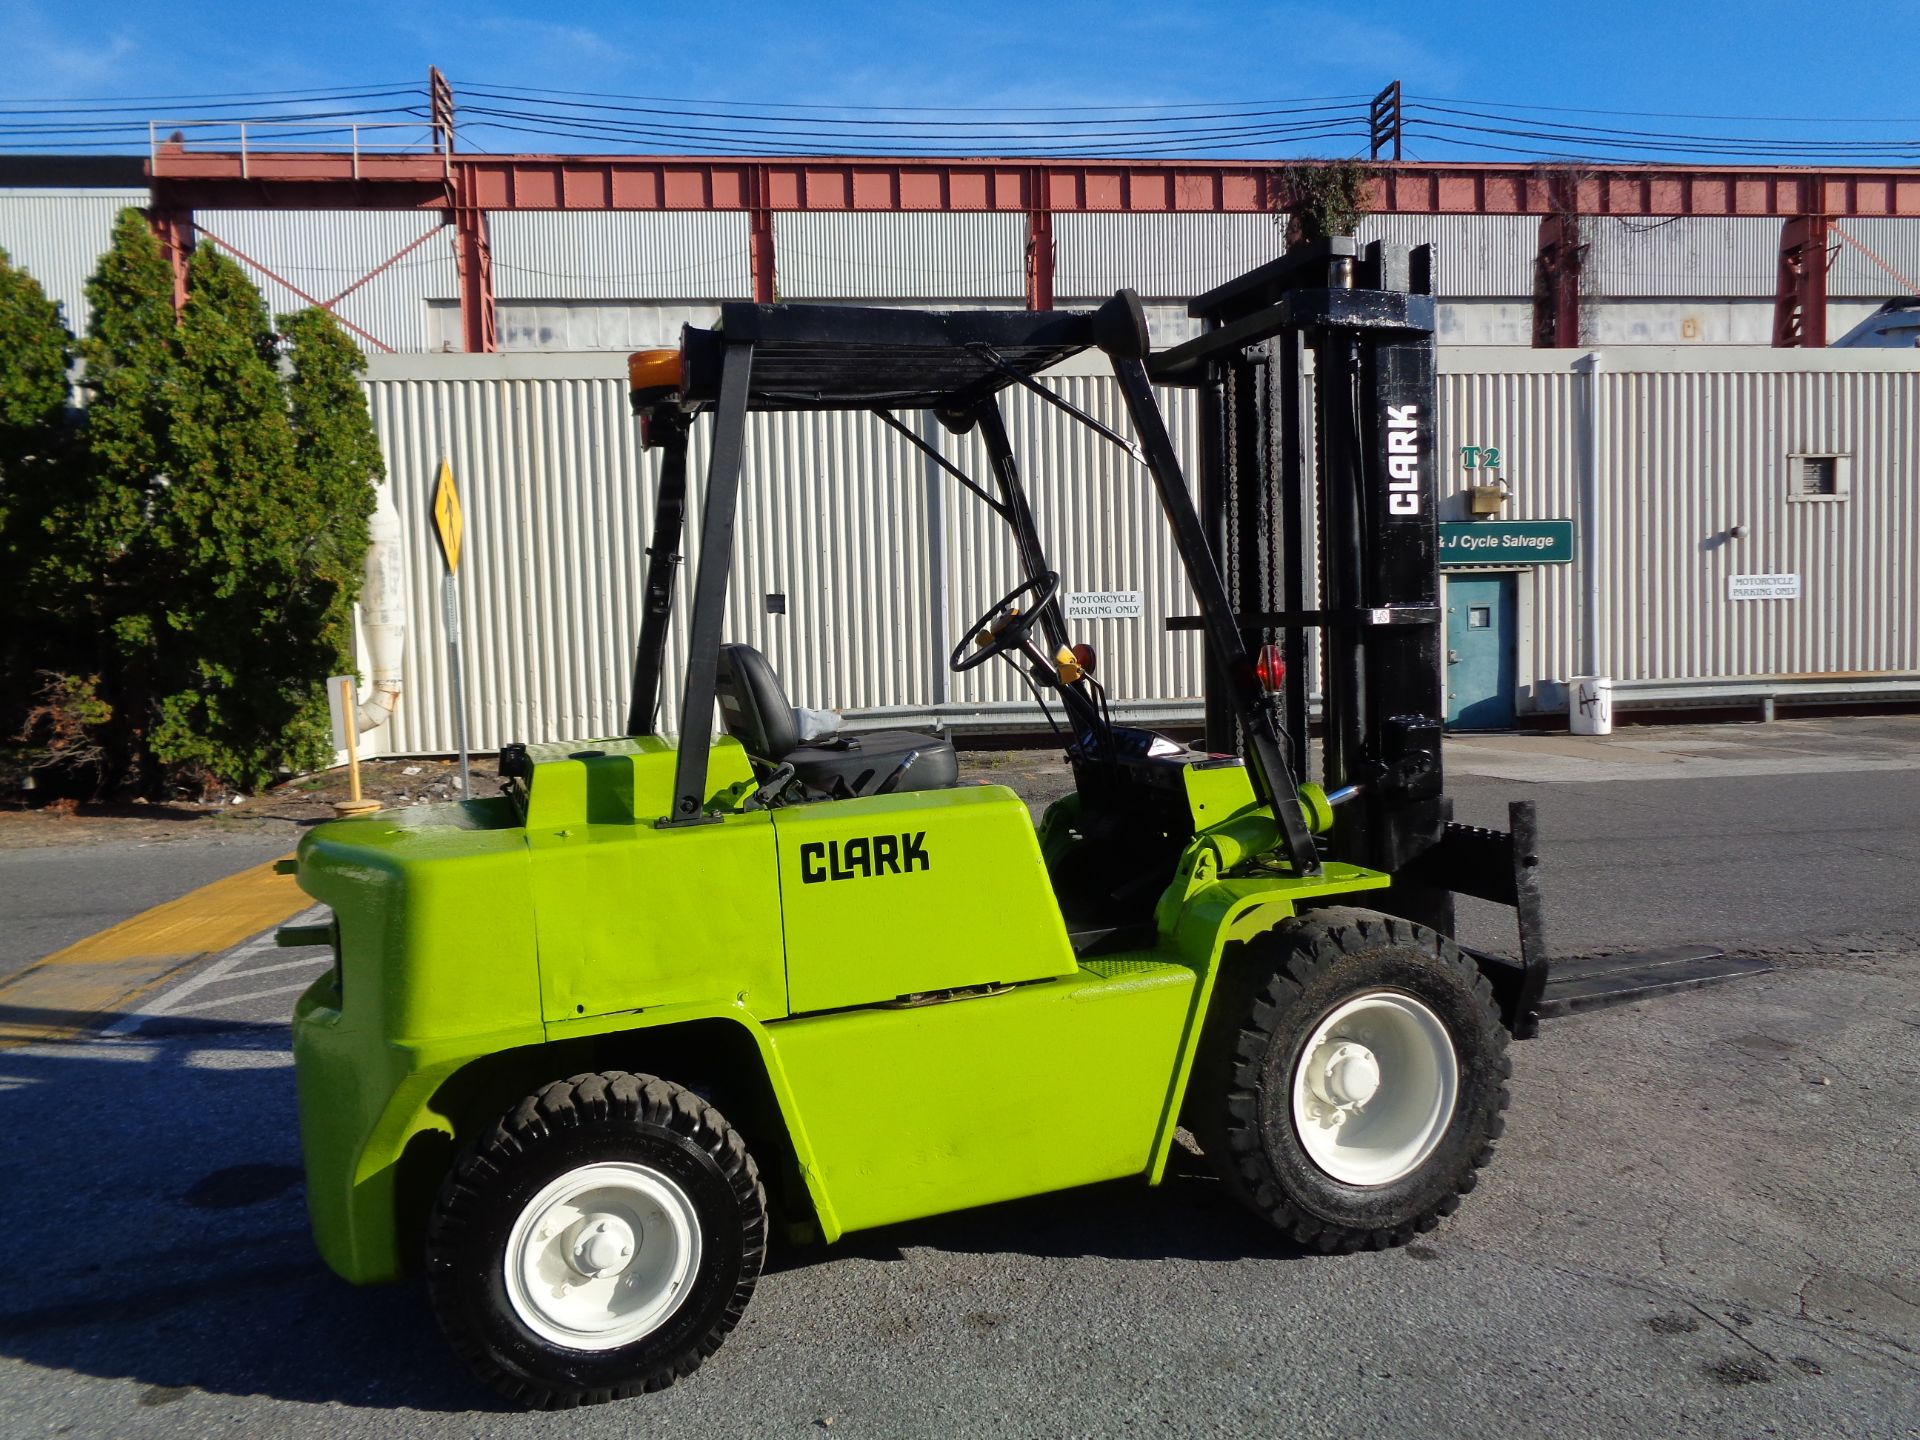 Clark C500-YS80 8,000 LBS Pneumatic Forklift - Image 8 of 11